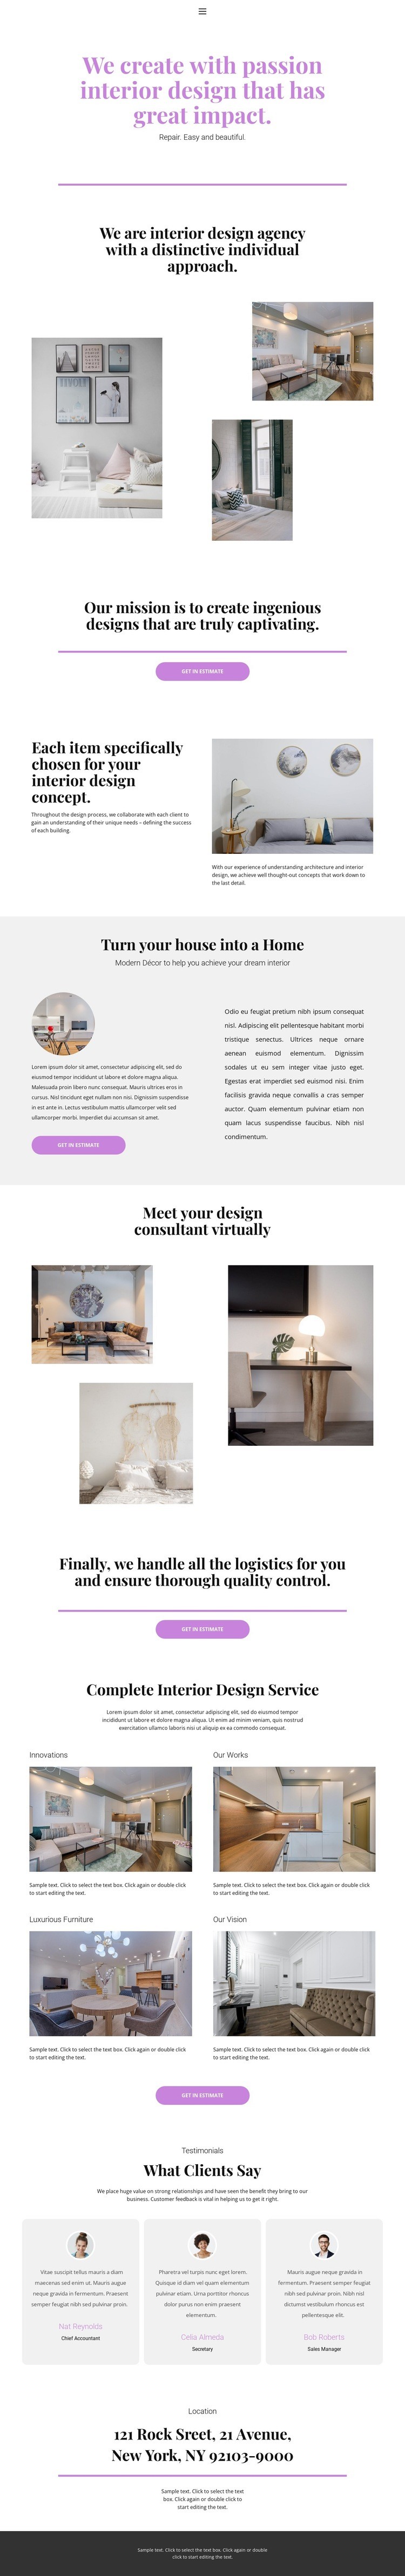 Choice of design for the house Wix Template Alternative